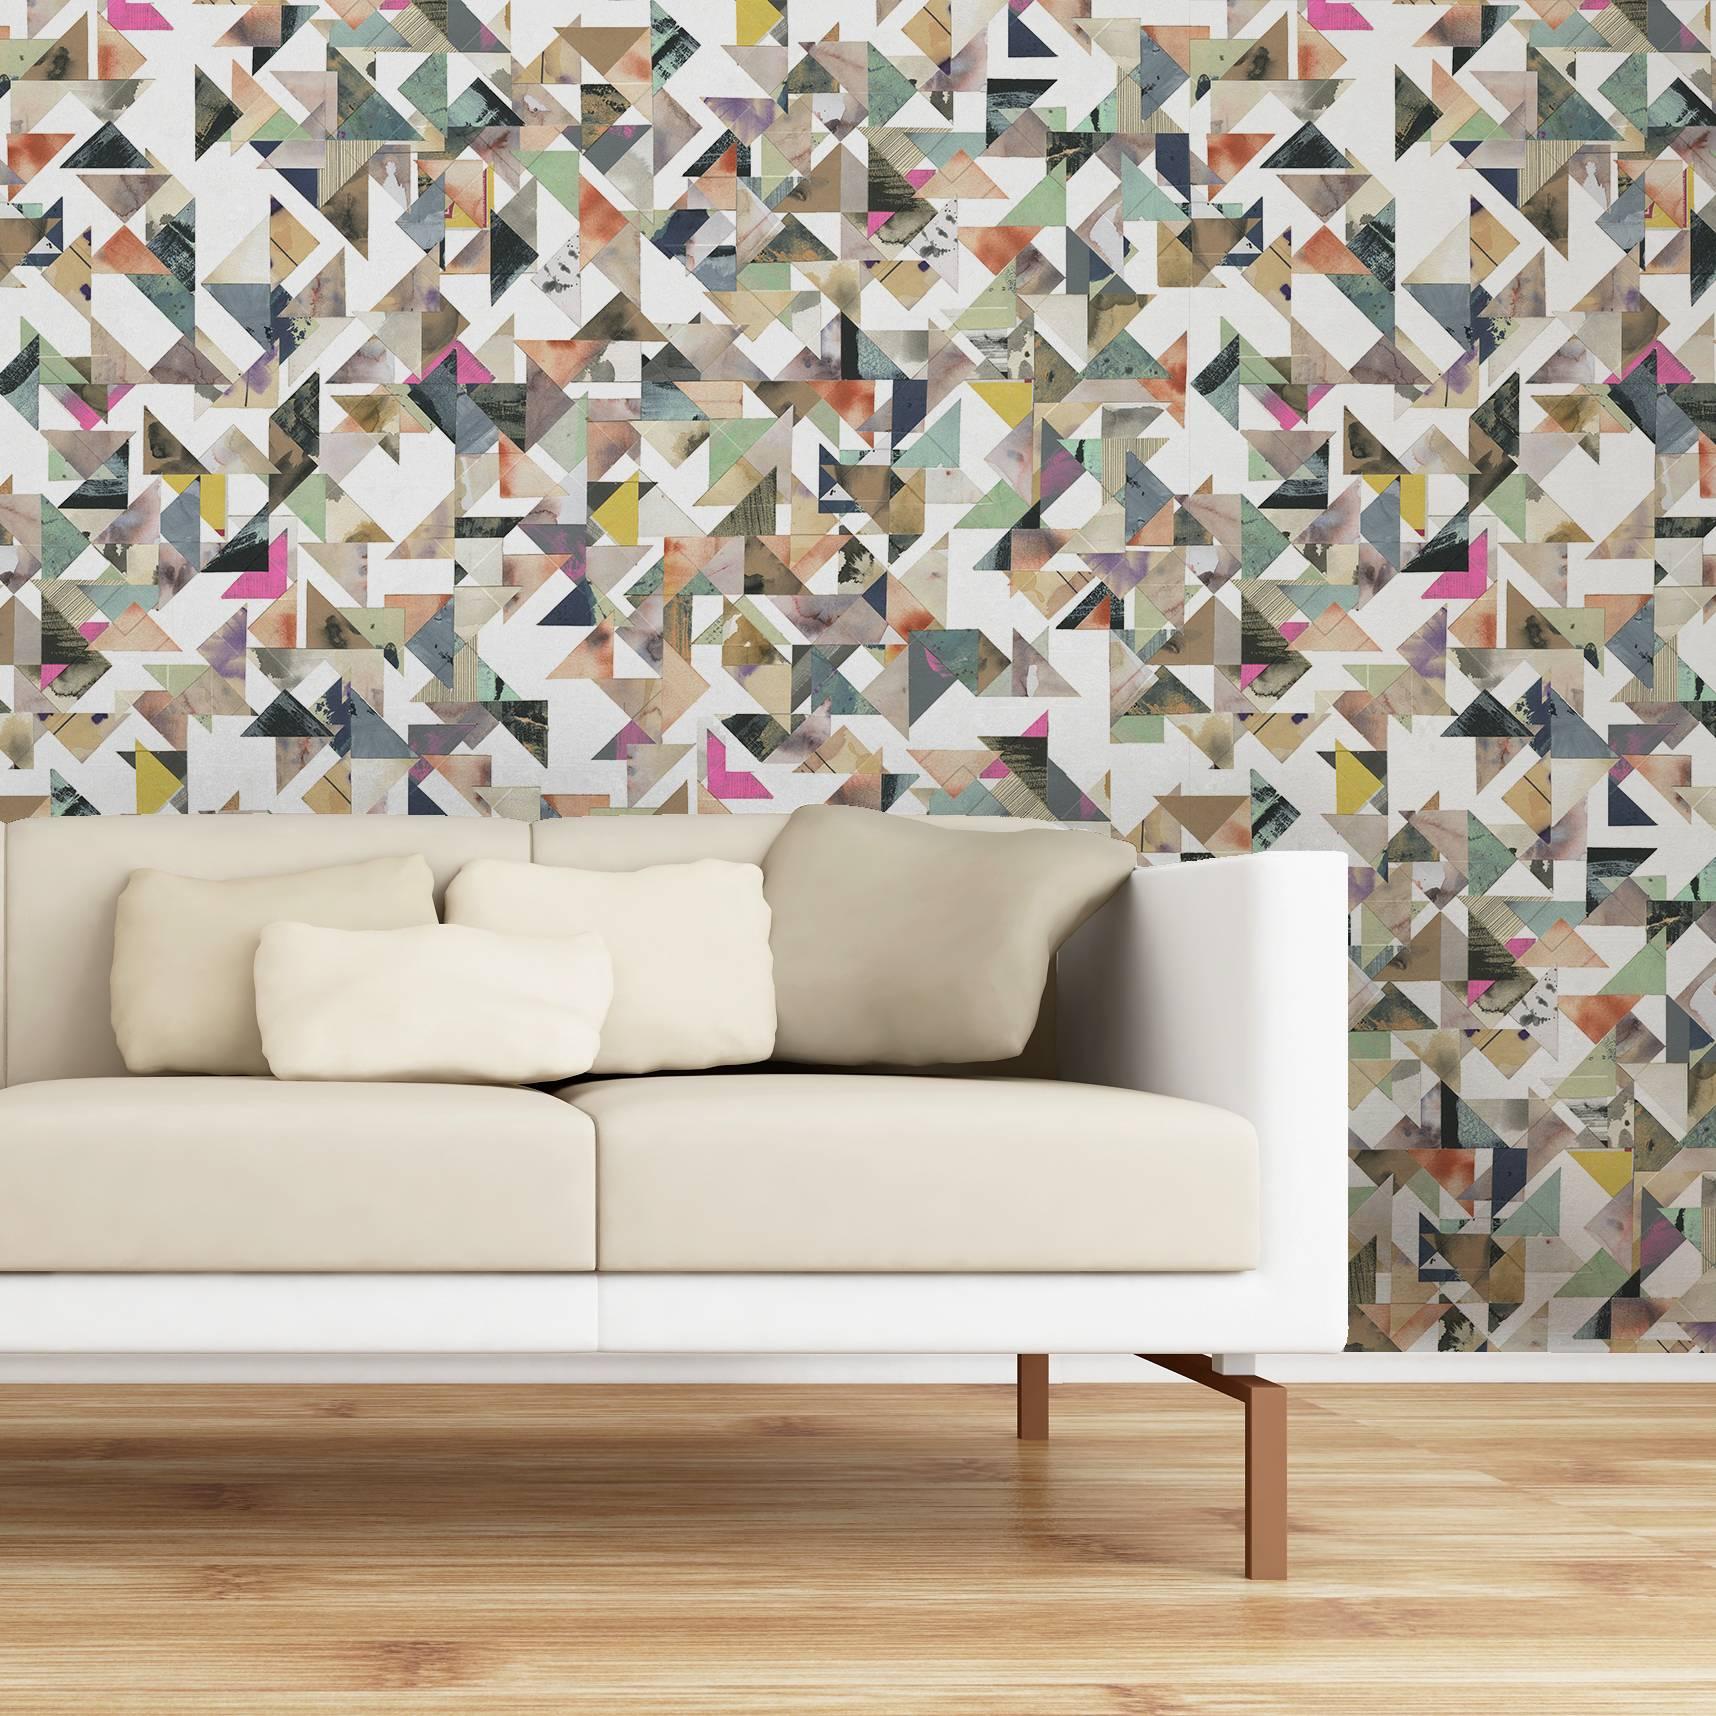 The interplay of precision, randomness, structure and fluidity is expressed in this colorful and mesmerizing wallpaper designed from original artwork by Max Kahan. Max worked with treated paper in a consistent triangle shape to create a free flowing